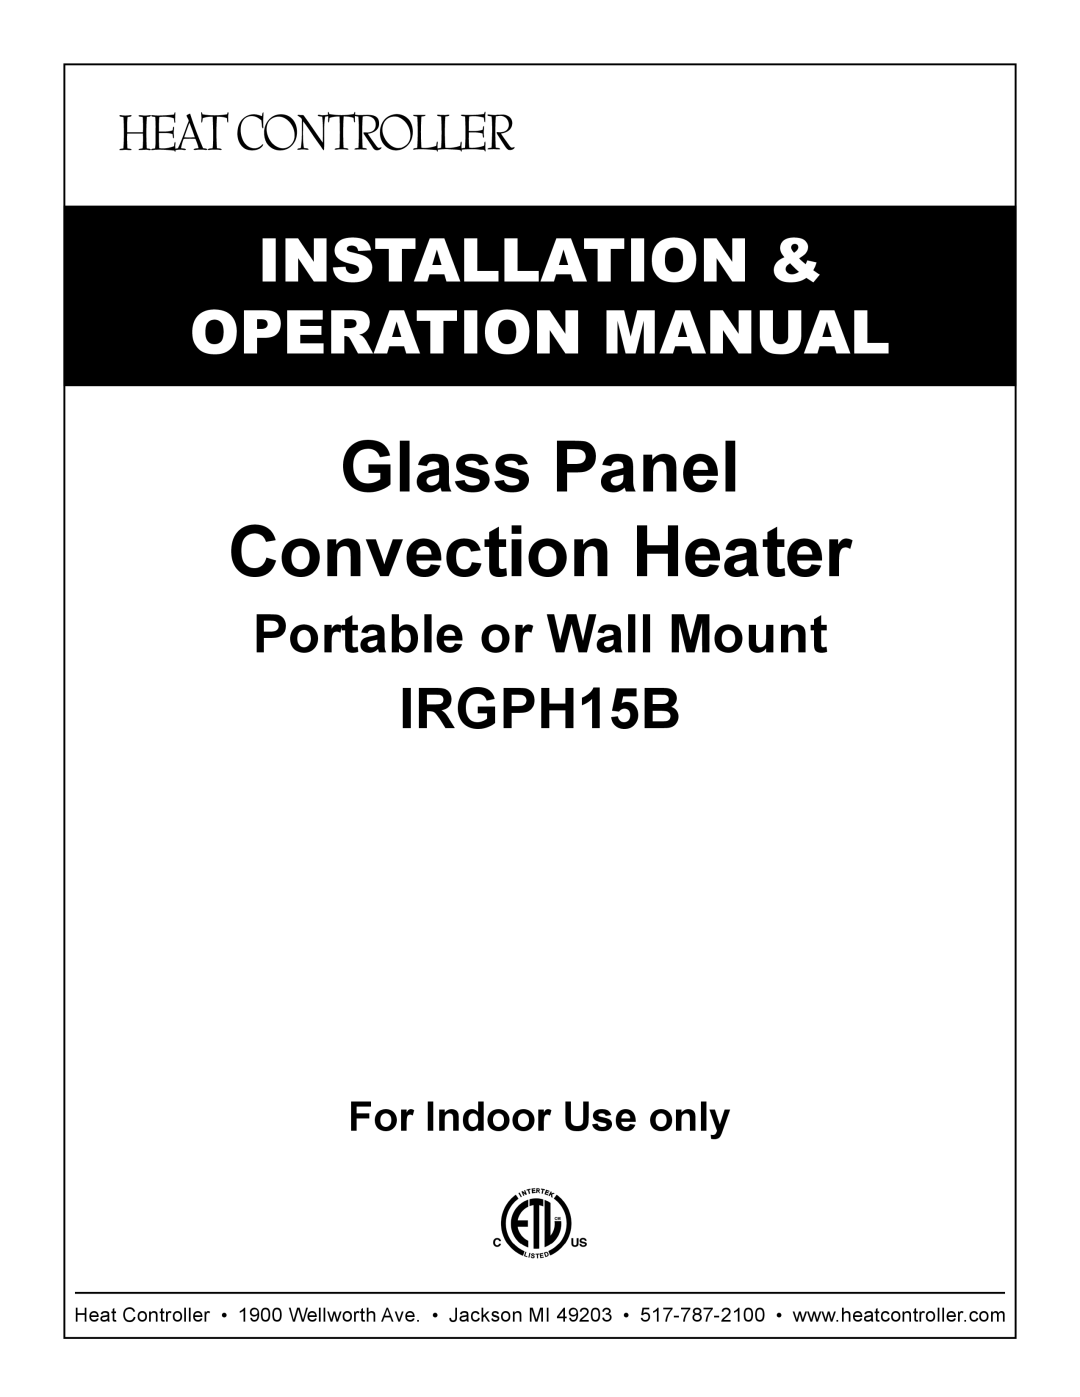 Heat Controller IRGPH15B operation manual Glass Panel Convection Heater, Portable or Wall Mount, For Indoor Use only 